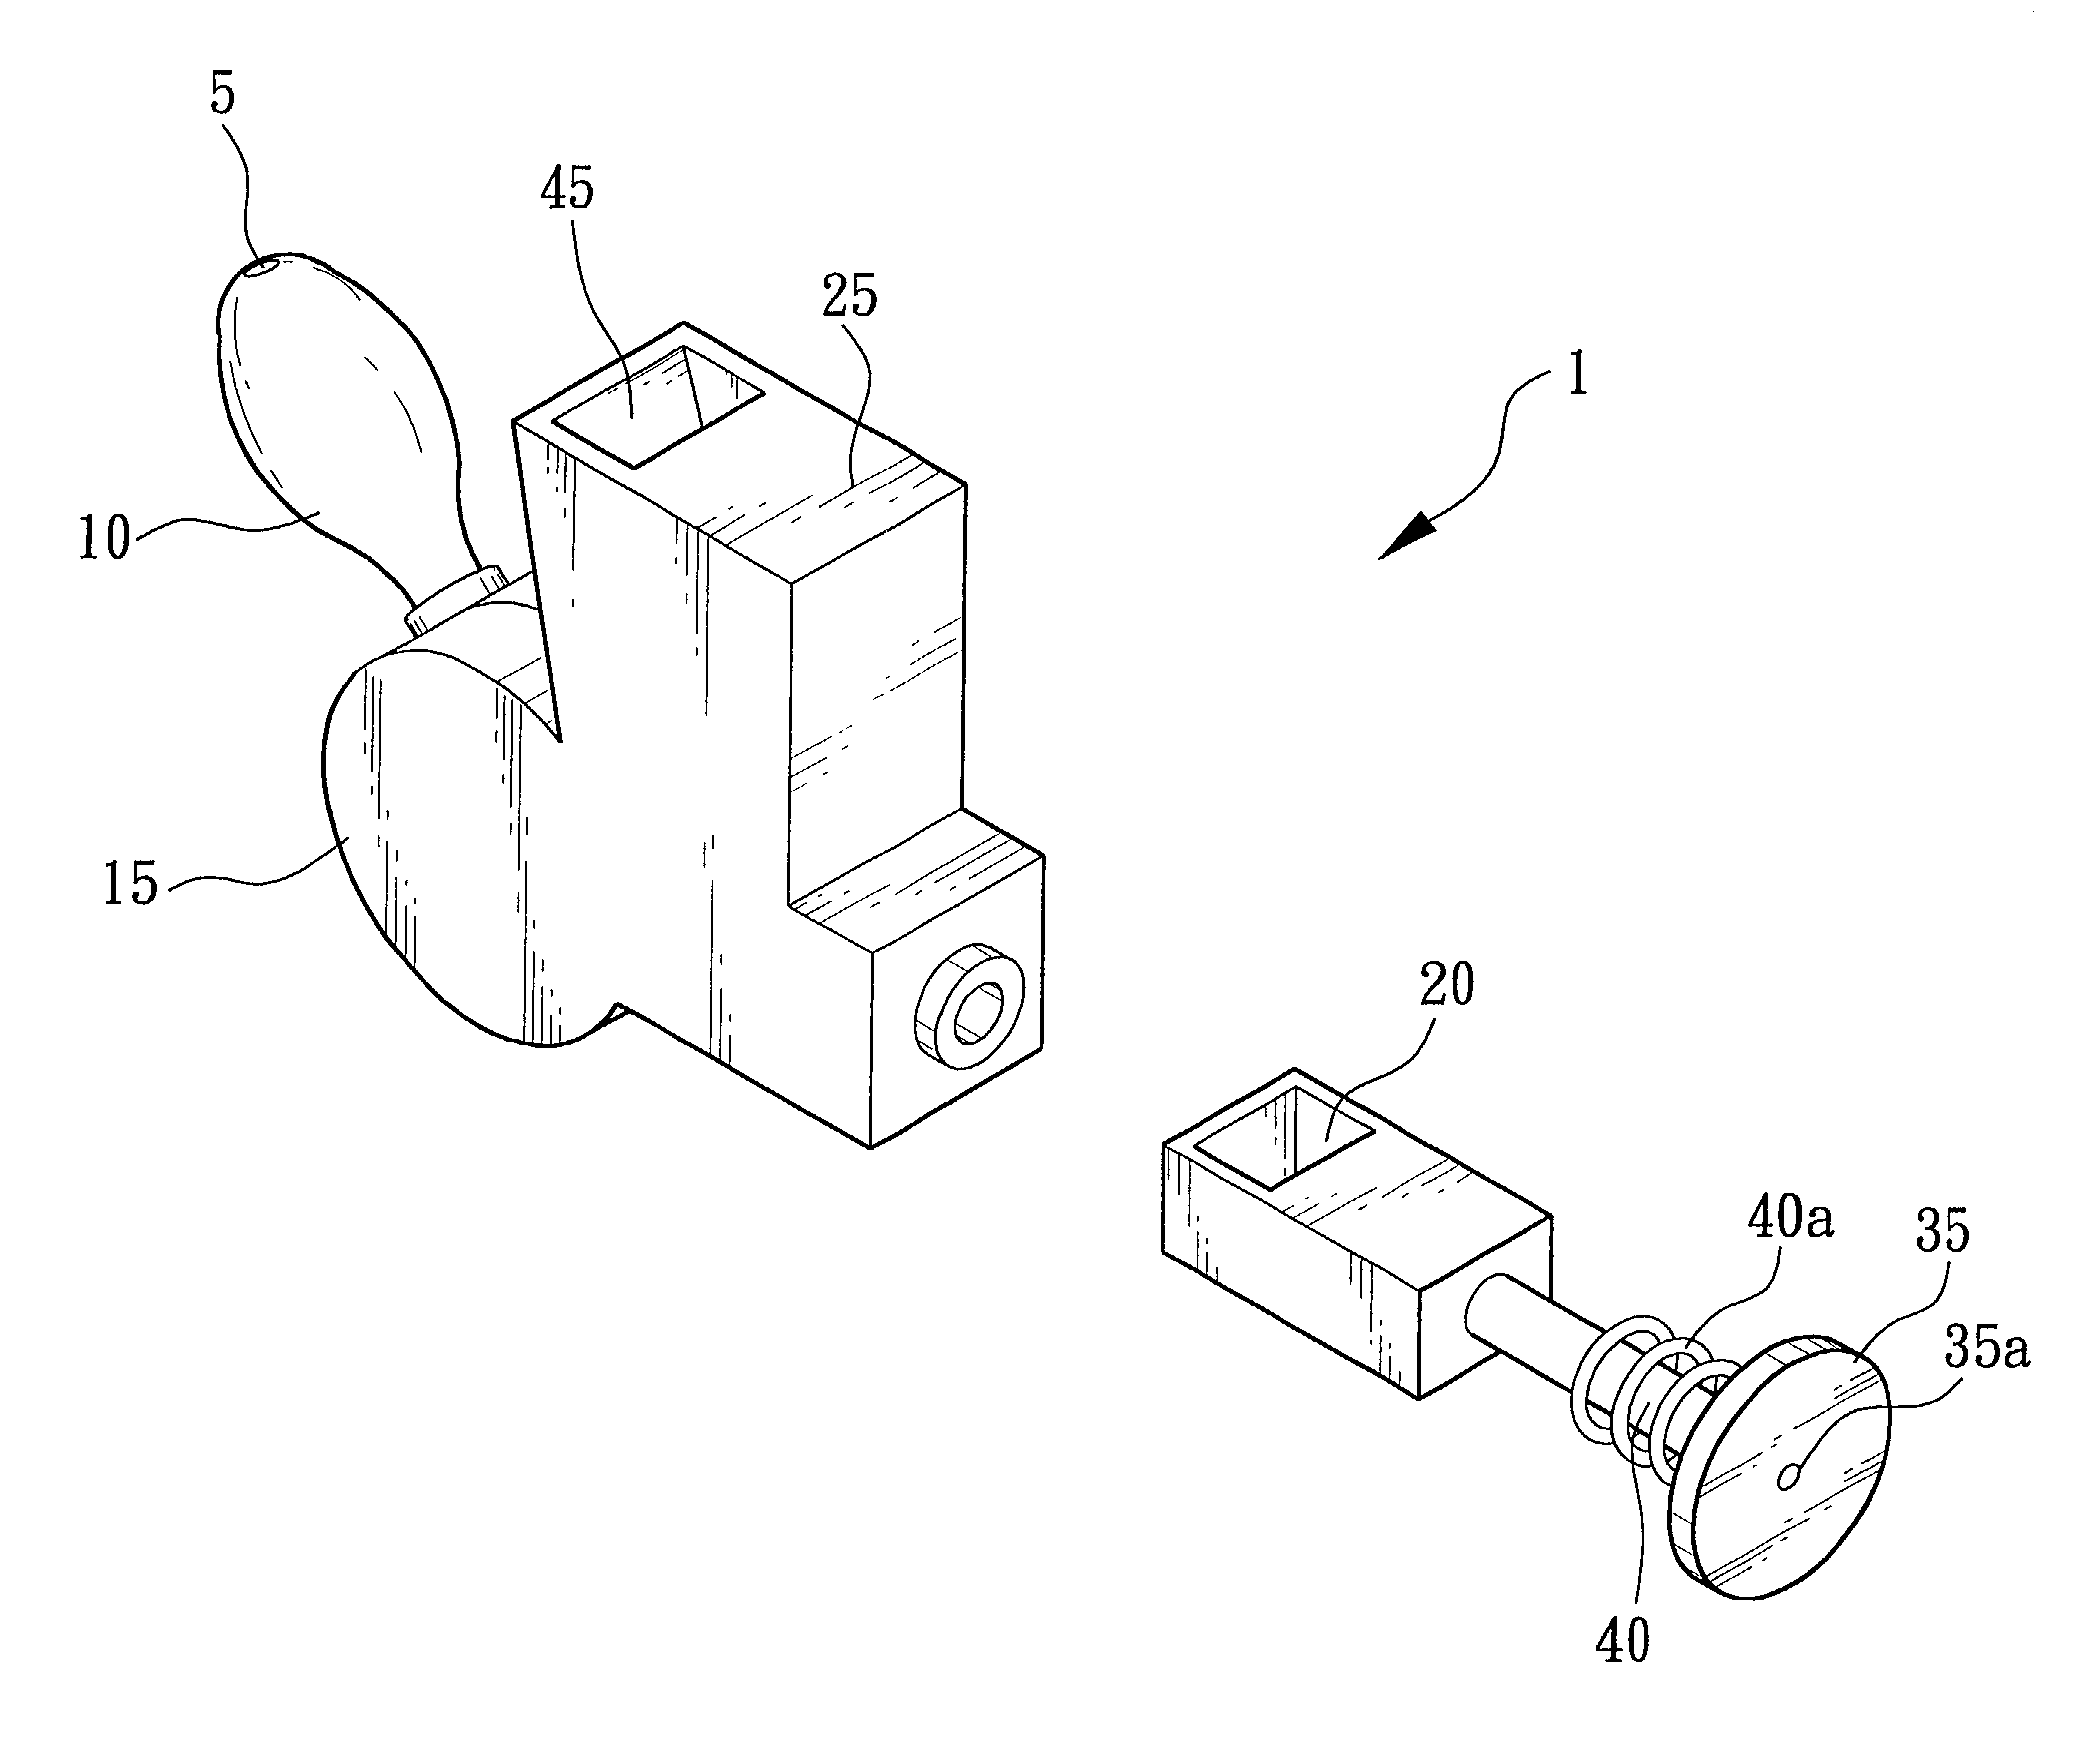 Method of medicine administration for respiratory tract